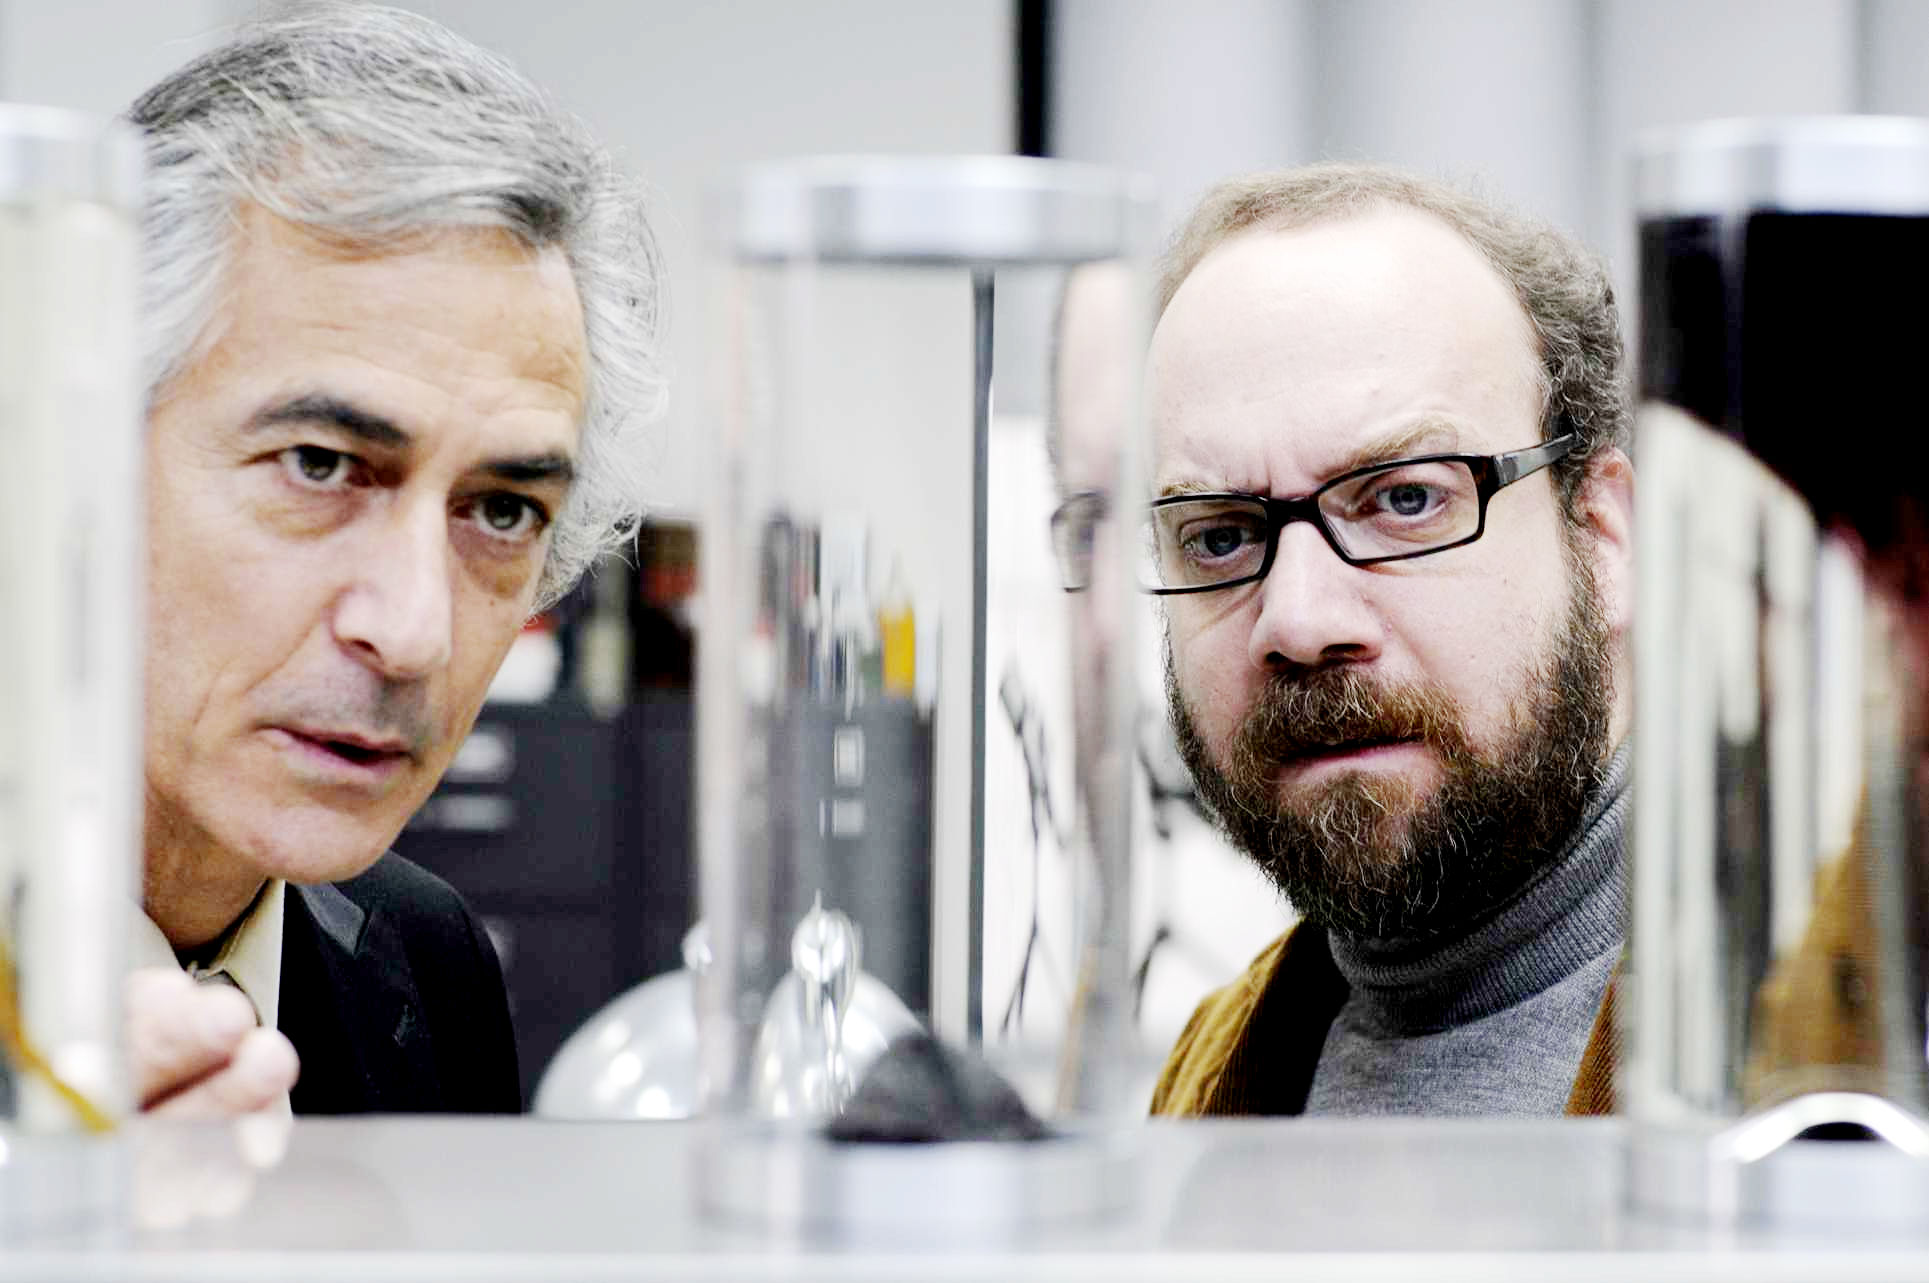 David Strathairn stars as Dr. Flintstein and Paul Giamatti stars as Paul in Journeyman Pictures' Cold Souls (2009). Photo credit by Adam Bell.